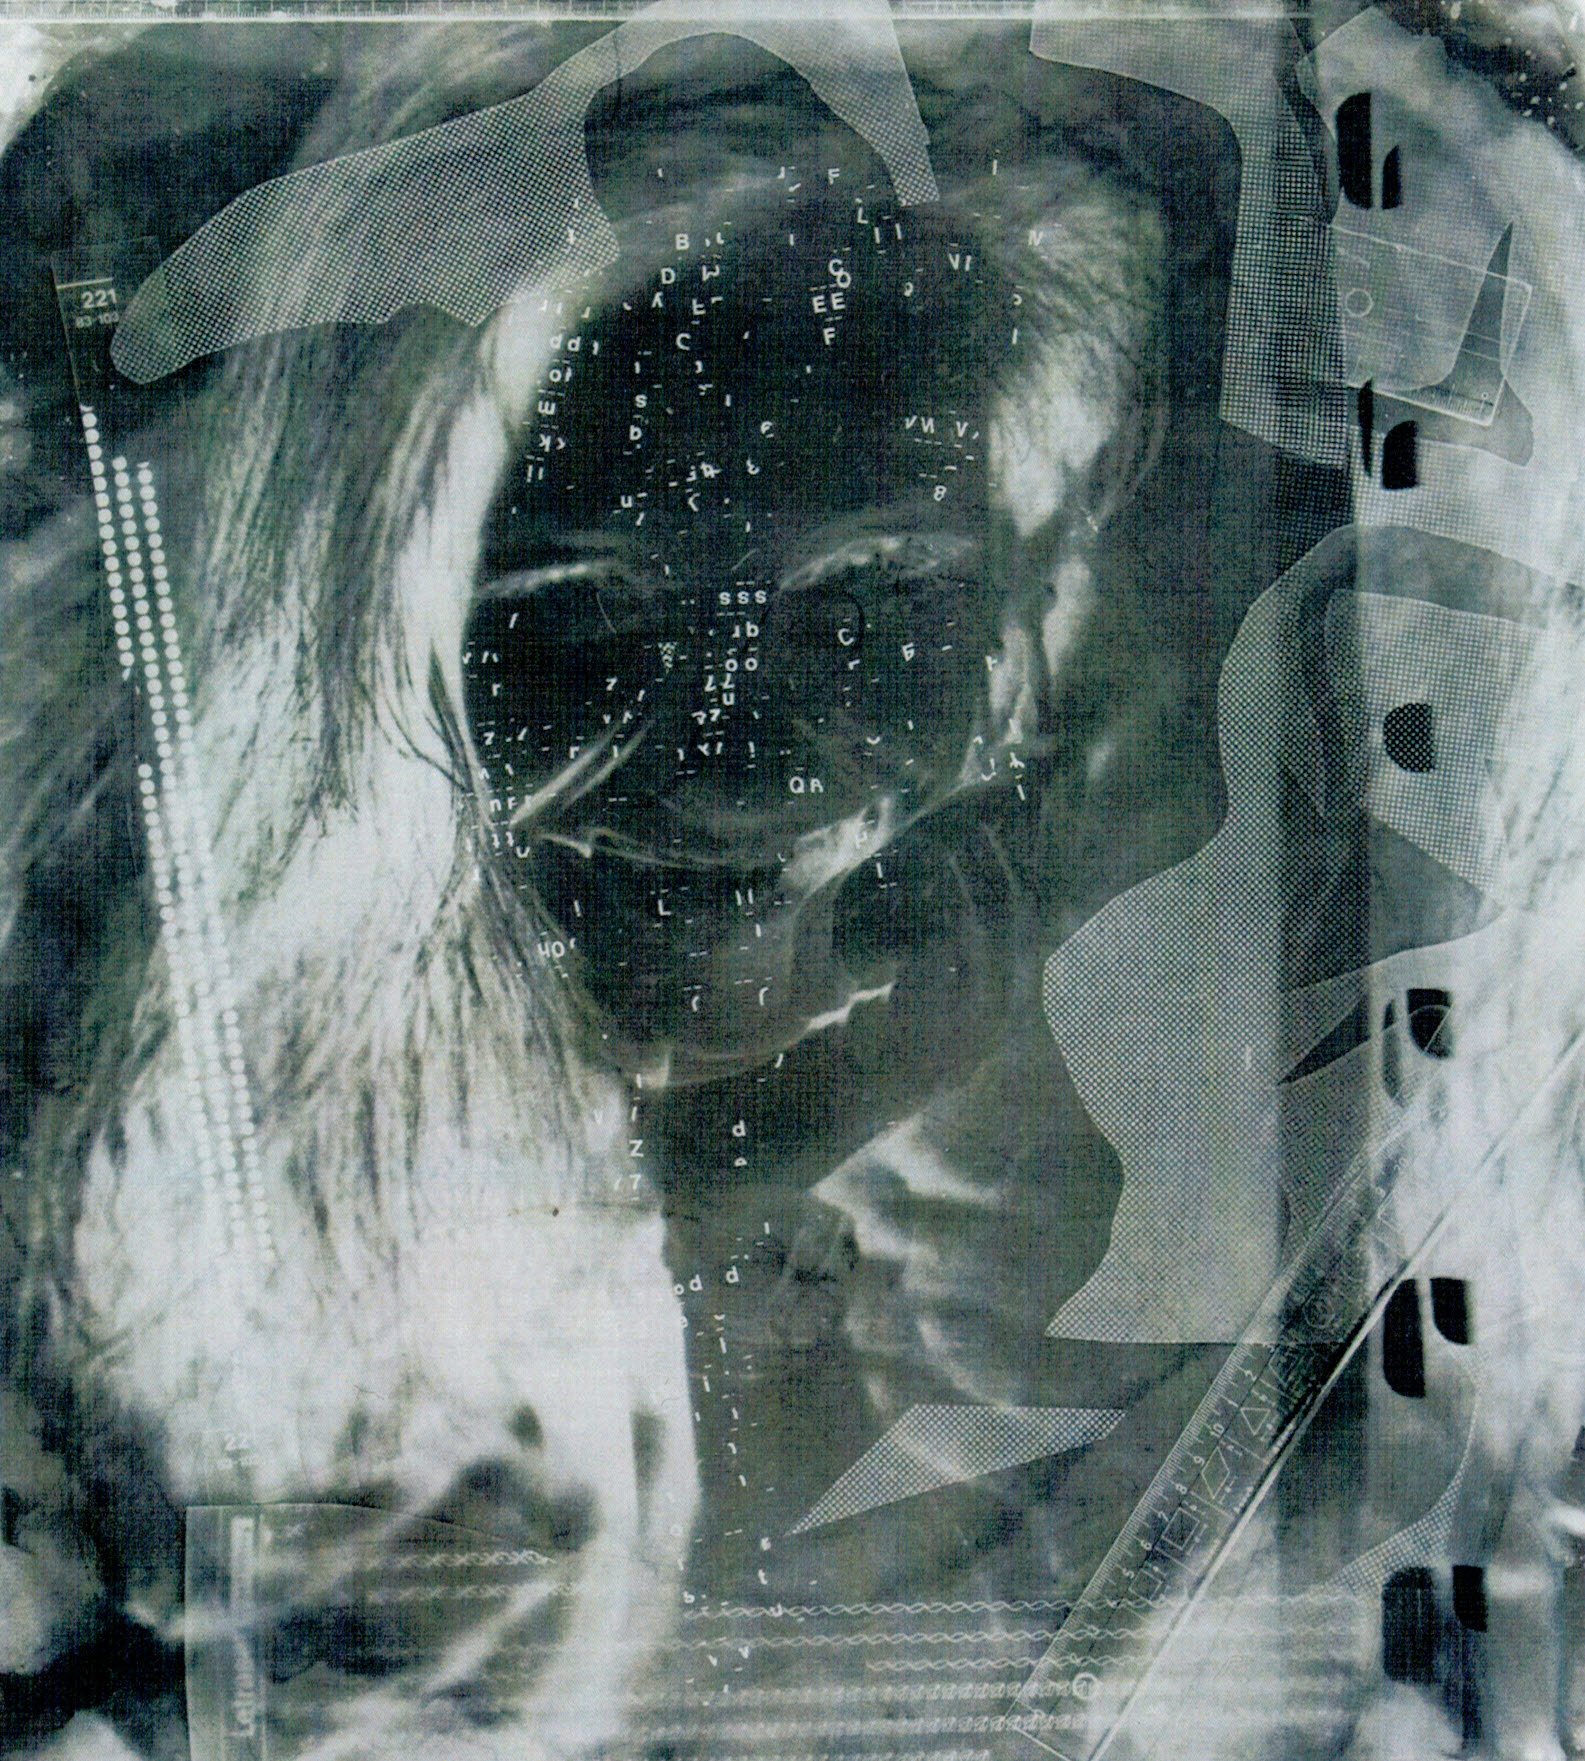 B. IN NEGATIVE (1989) black and white photograph, photogram, letraset